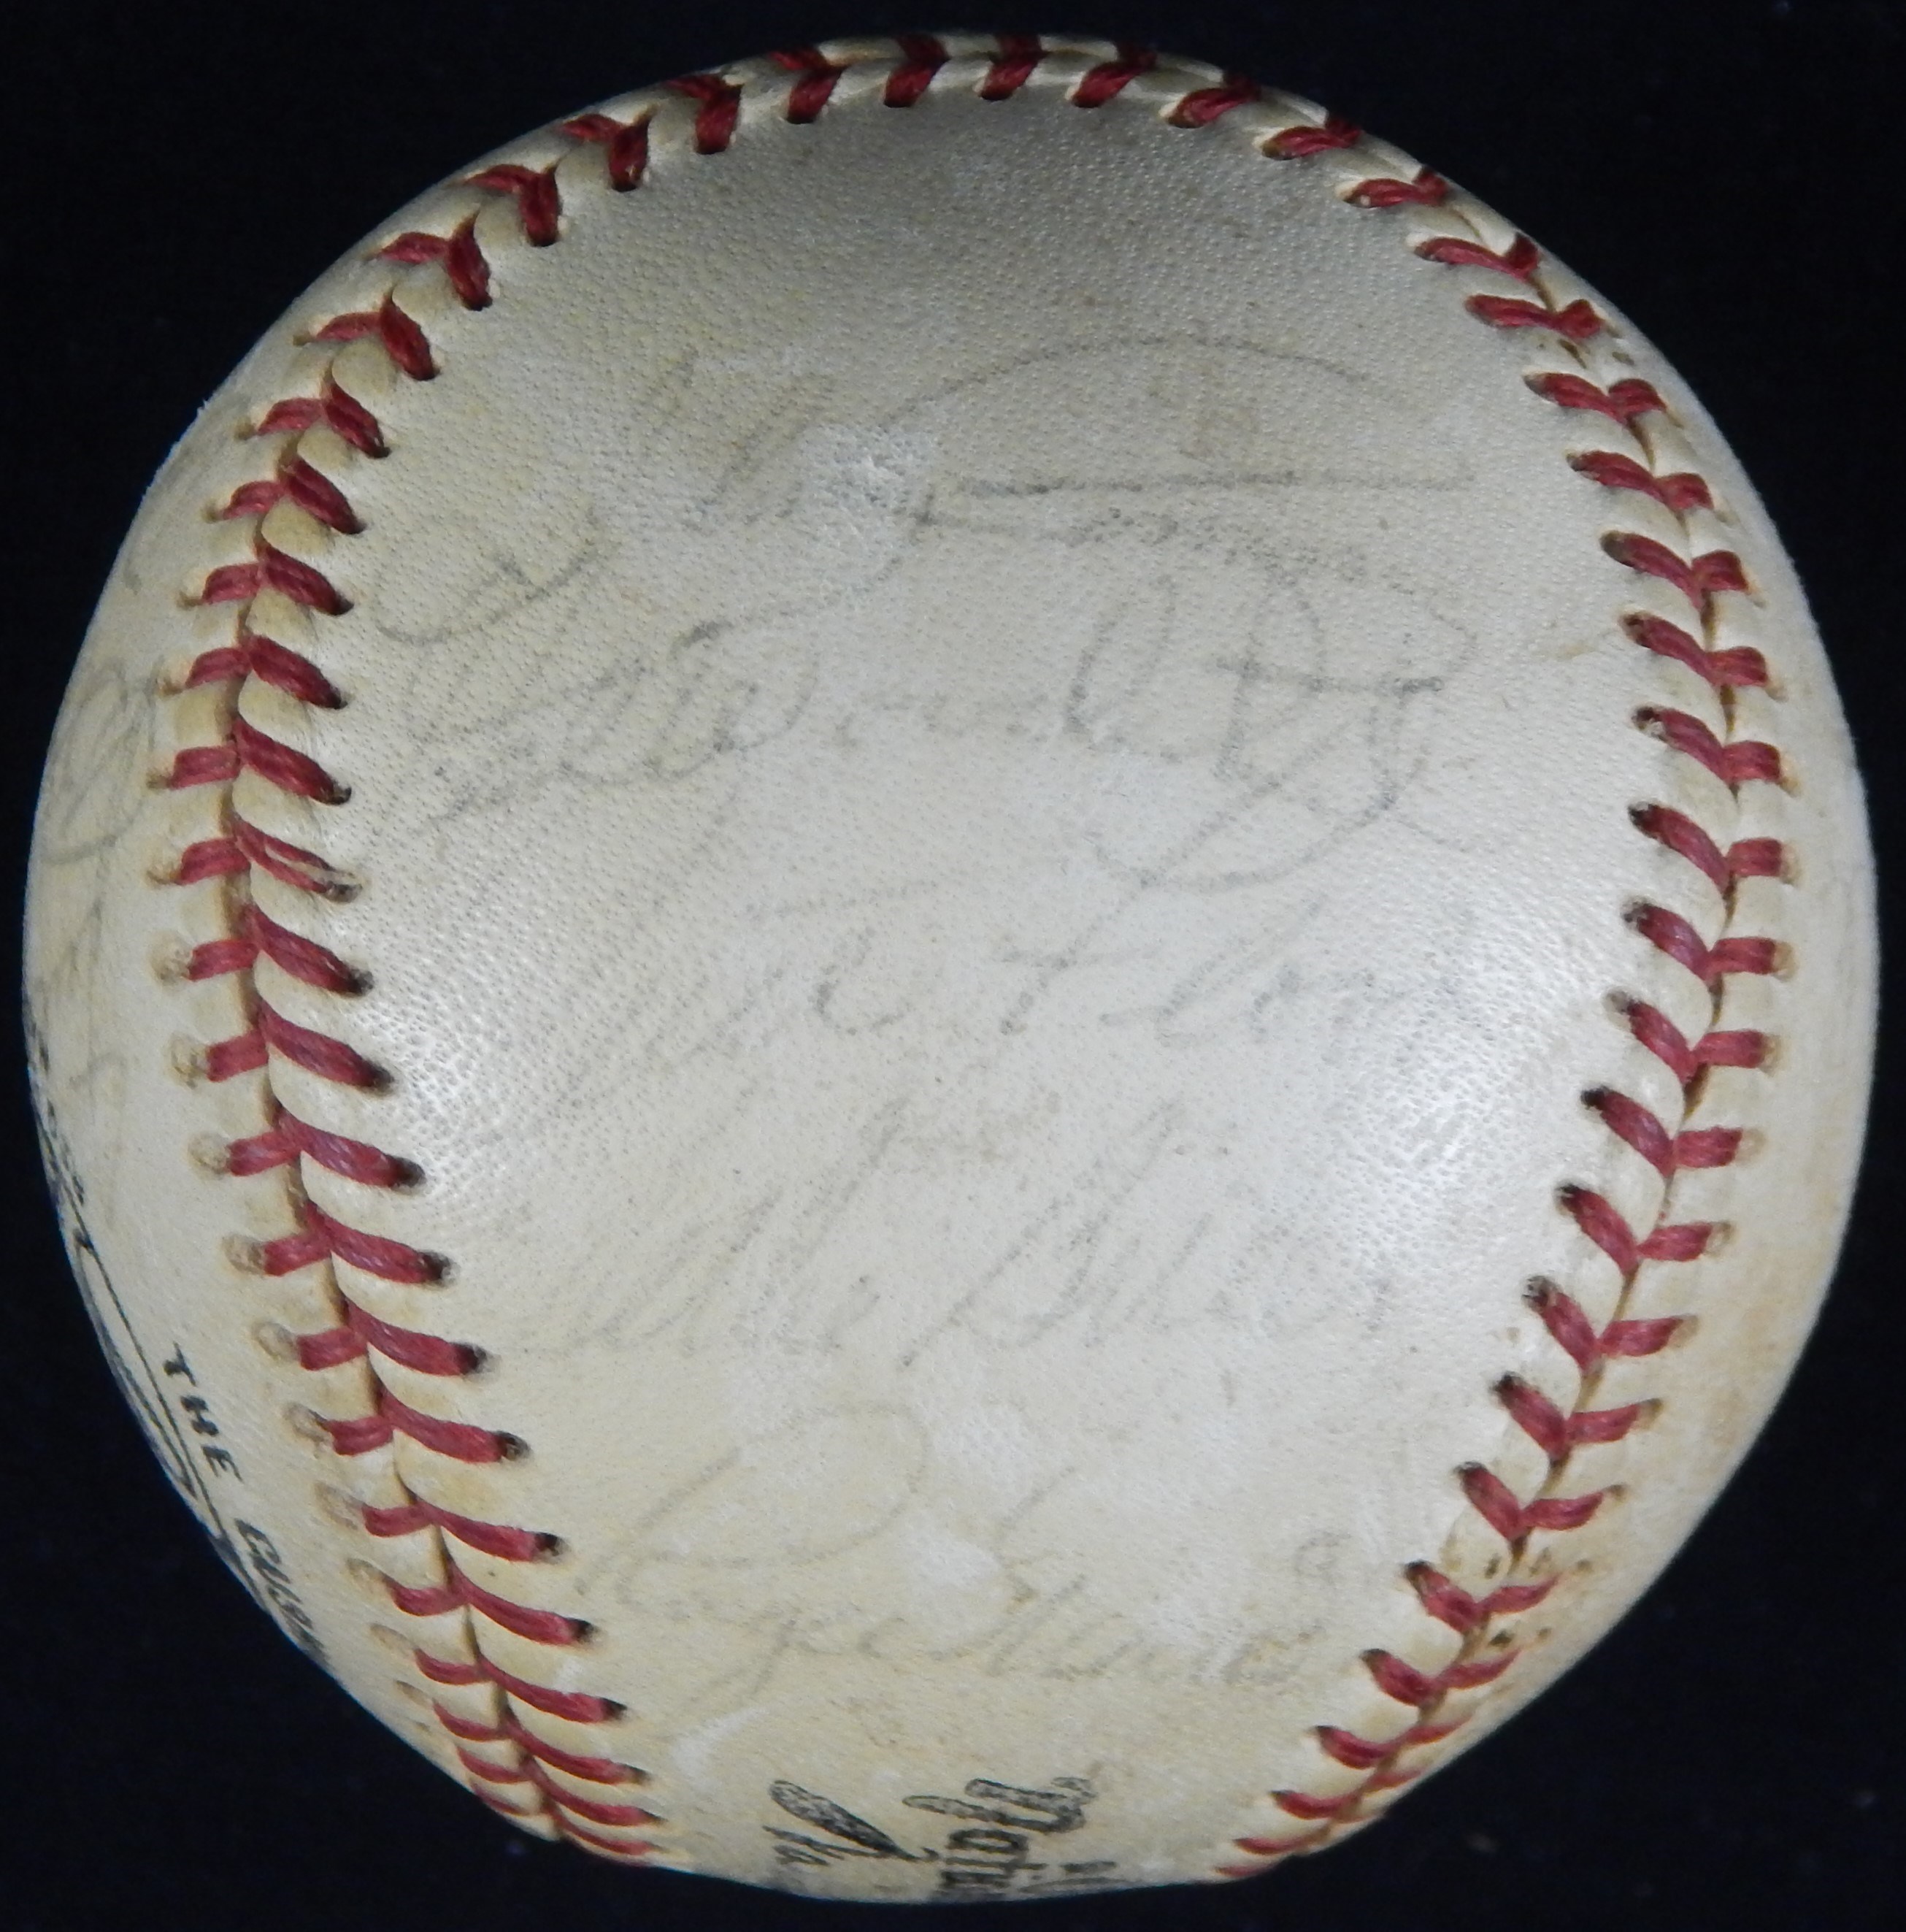 1967 St. Louis Cardinals World Series Champions Team Signed Baseball with 26 Signatures